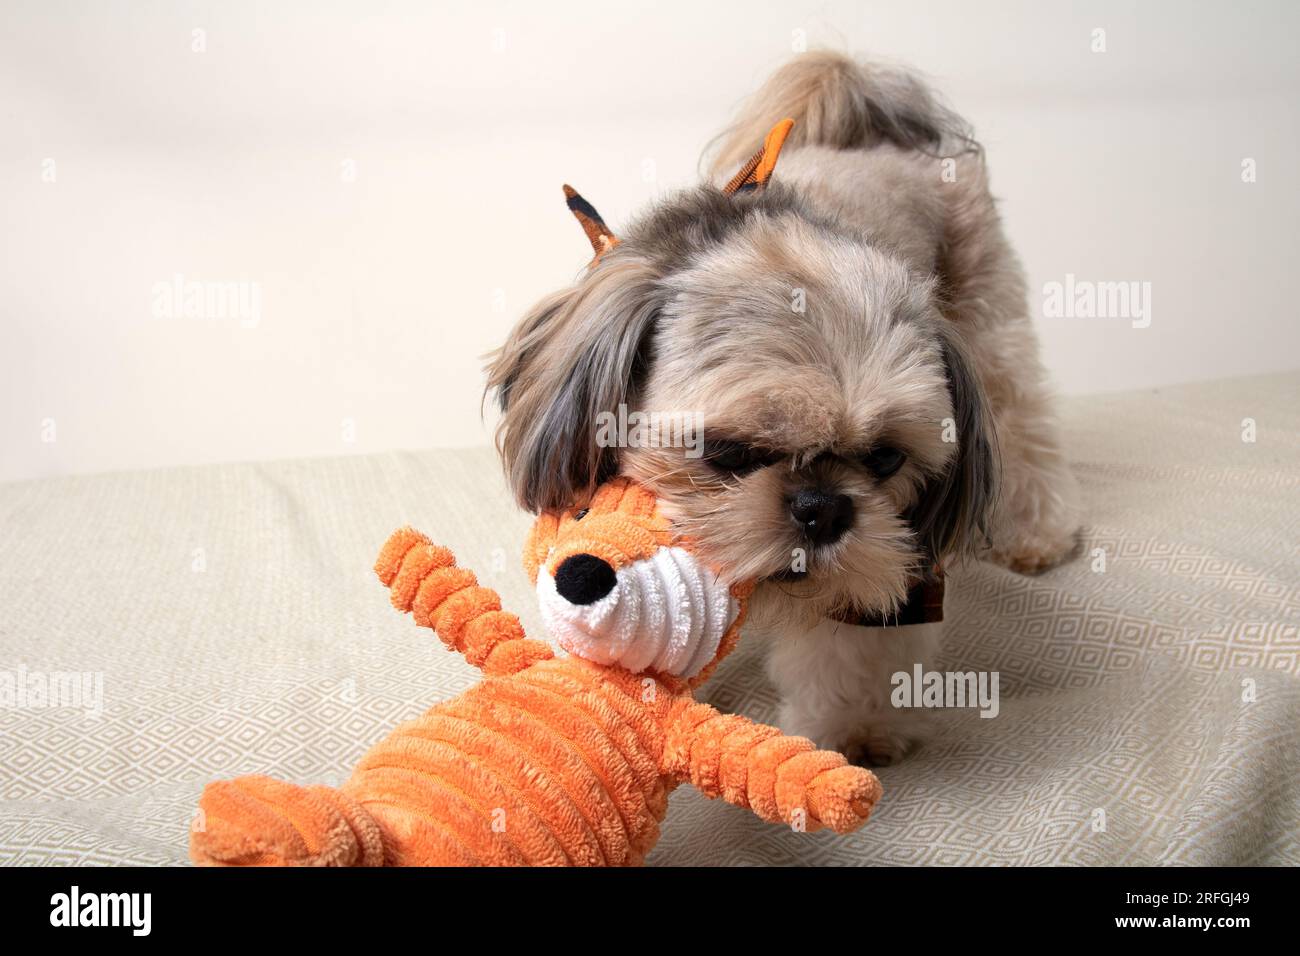 https://c8.alamy.com/comp/2RFGJ49/photo-of-a-dog-holding-a-small-soft-toy-in-its-teeth-at-home-on-the-couch-2RFGJ49.jpg